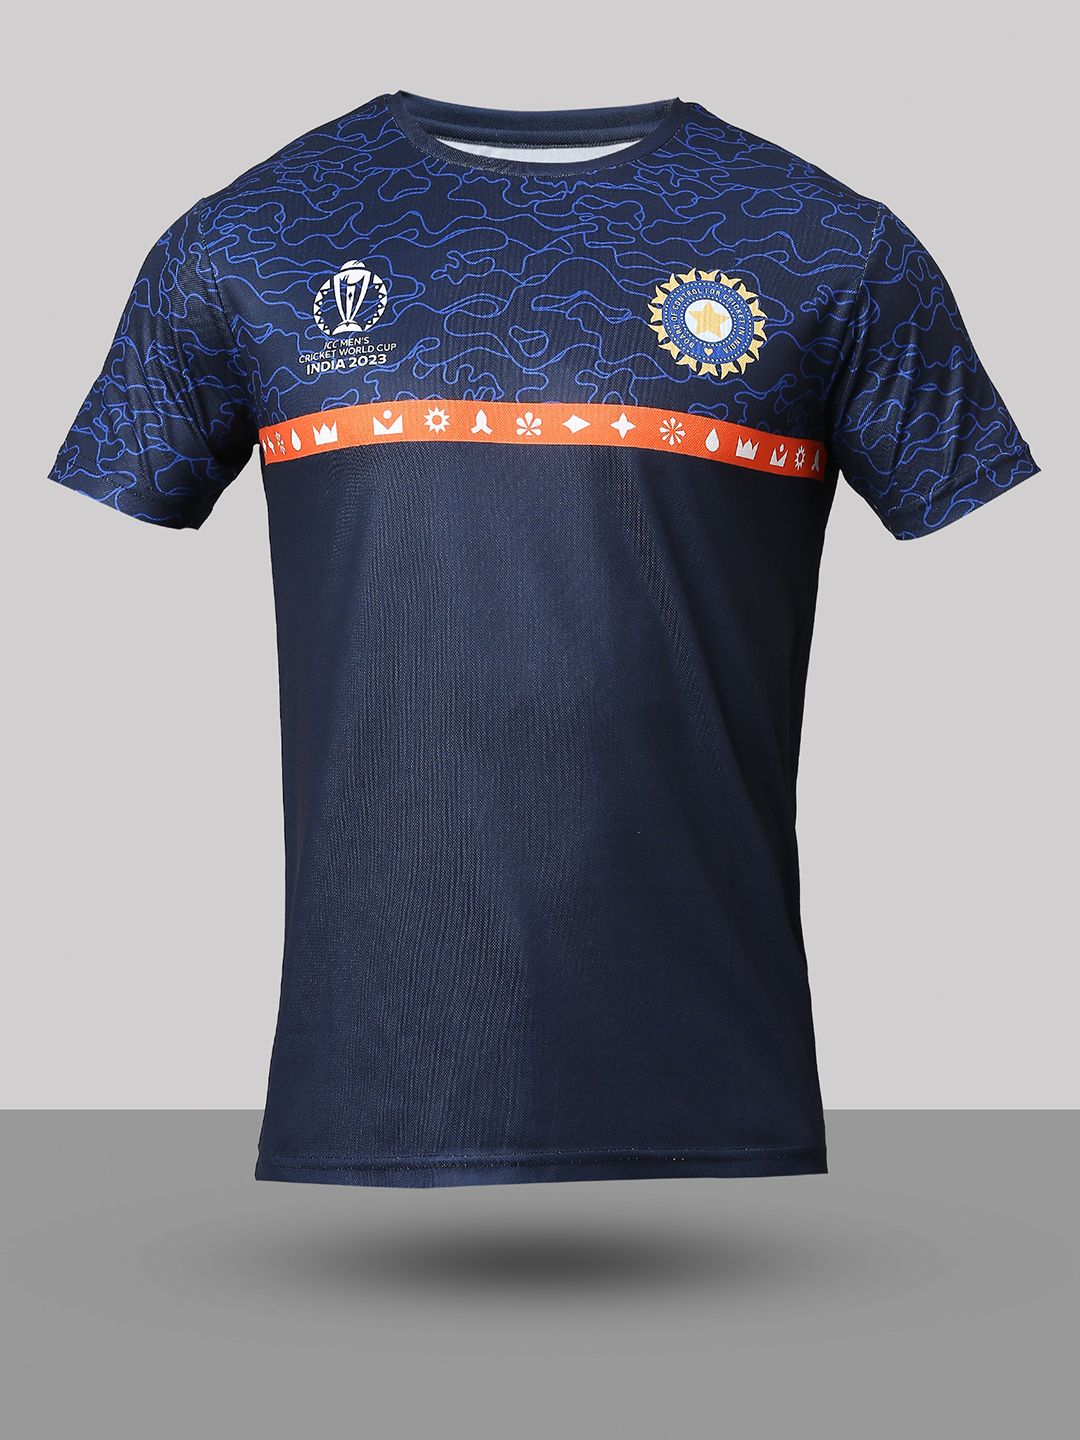 Buy Official ICC CWC-23 Men Navy Blue Printed Short Sleeves Round Neck ...